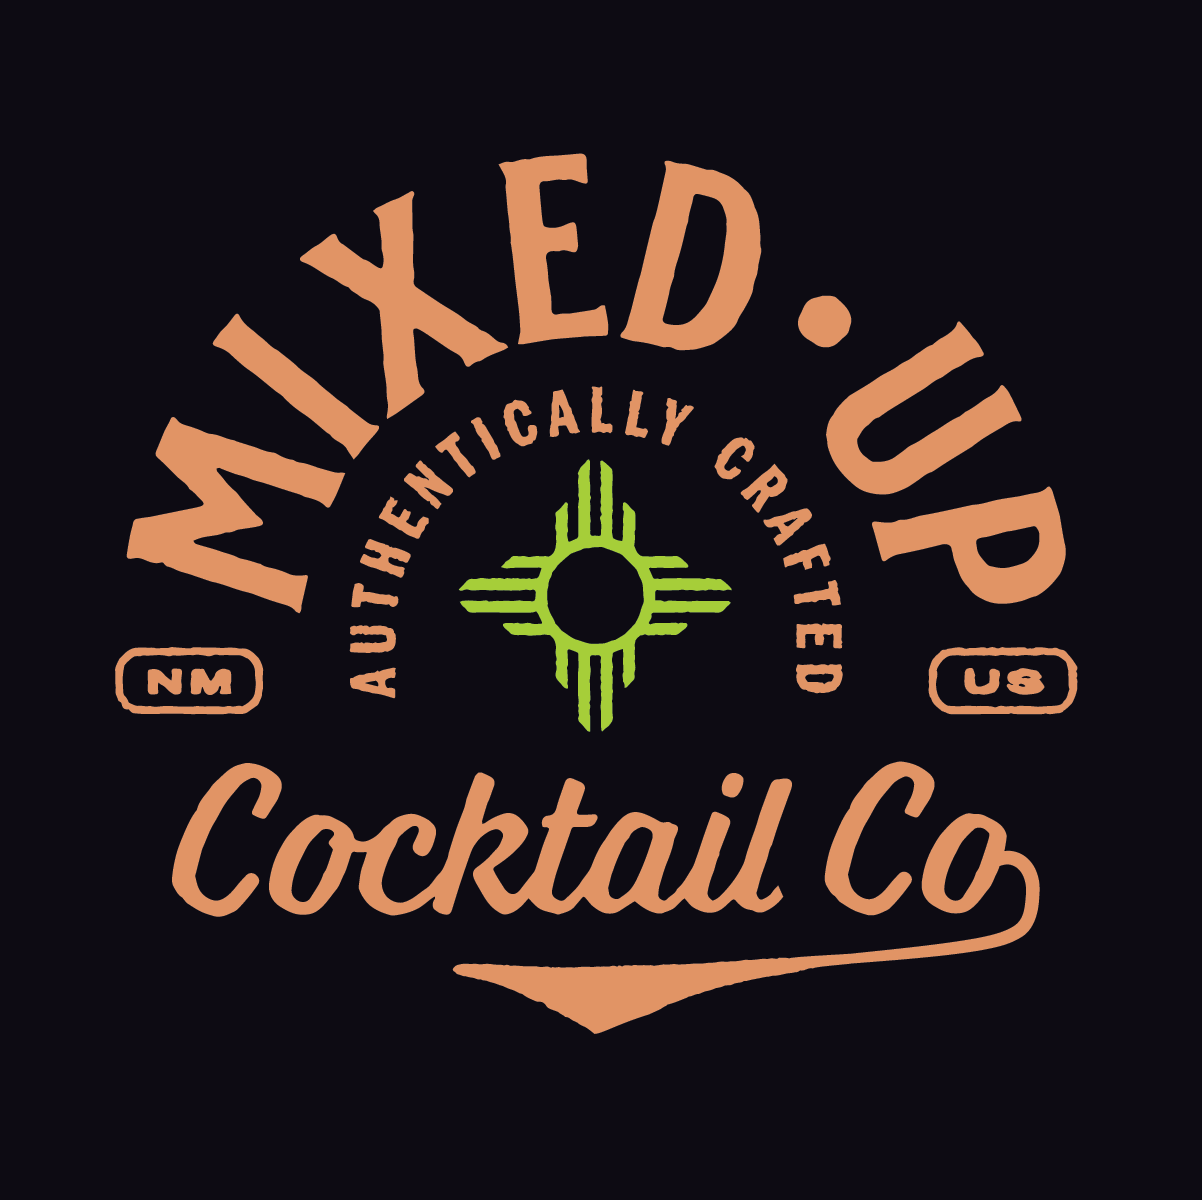 Mixed-Up Cocktail Co